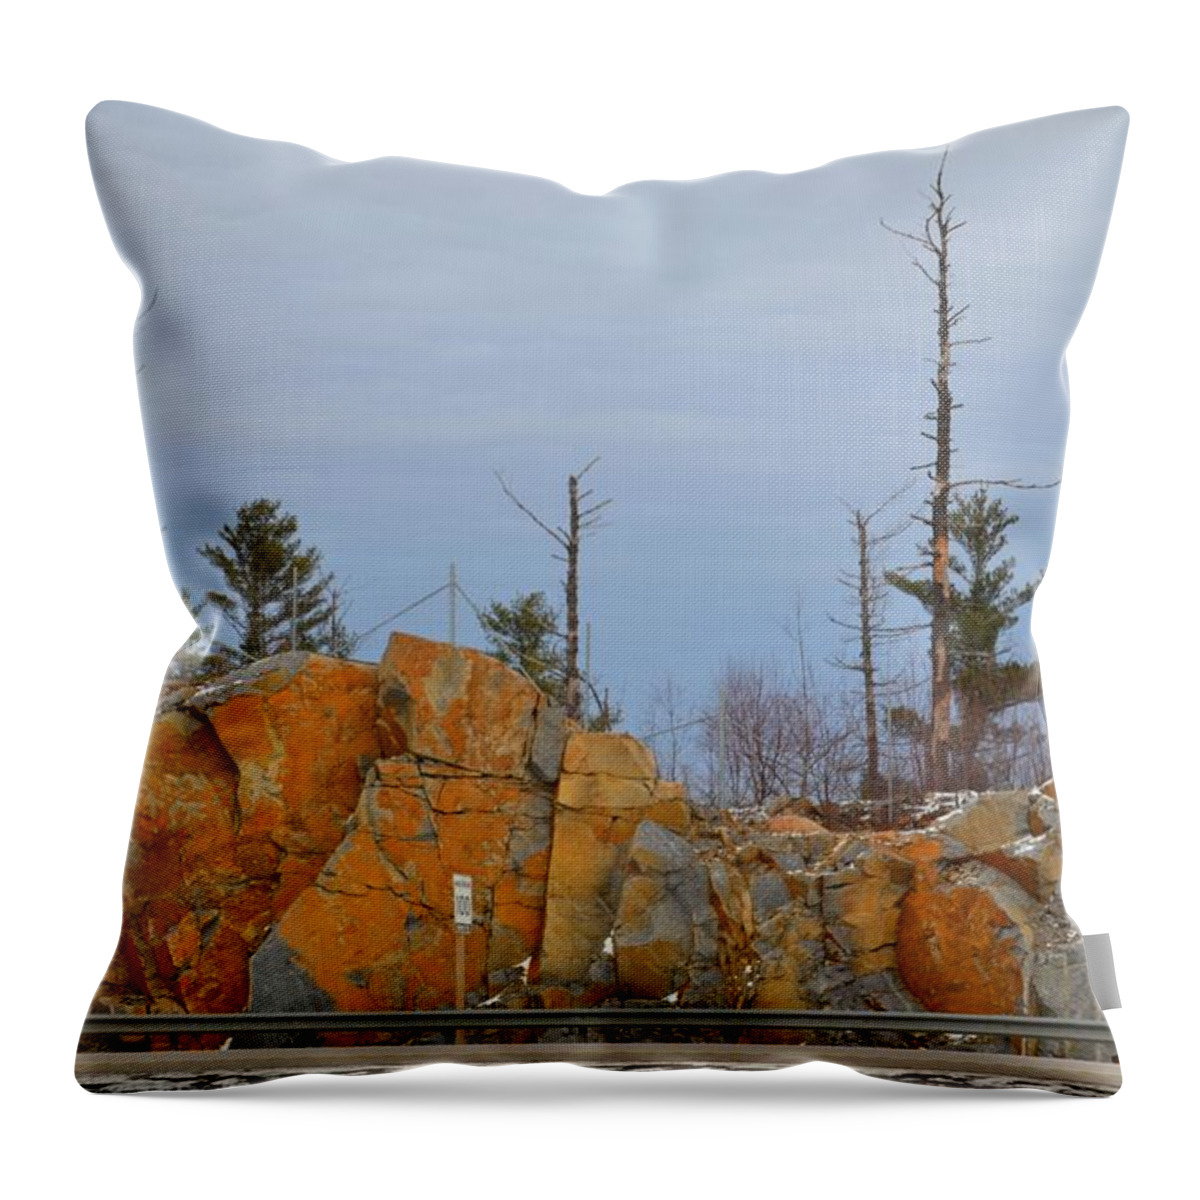 Landscape Throw Pillow featuring the photograph Across The Highway by Lyle Crump